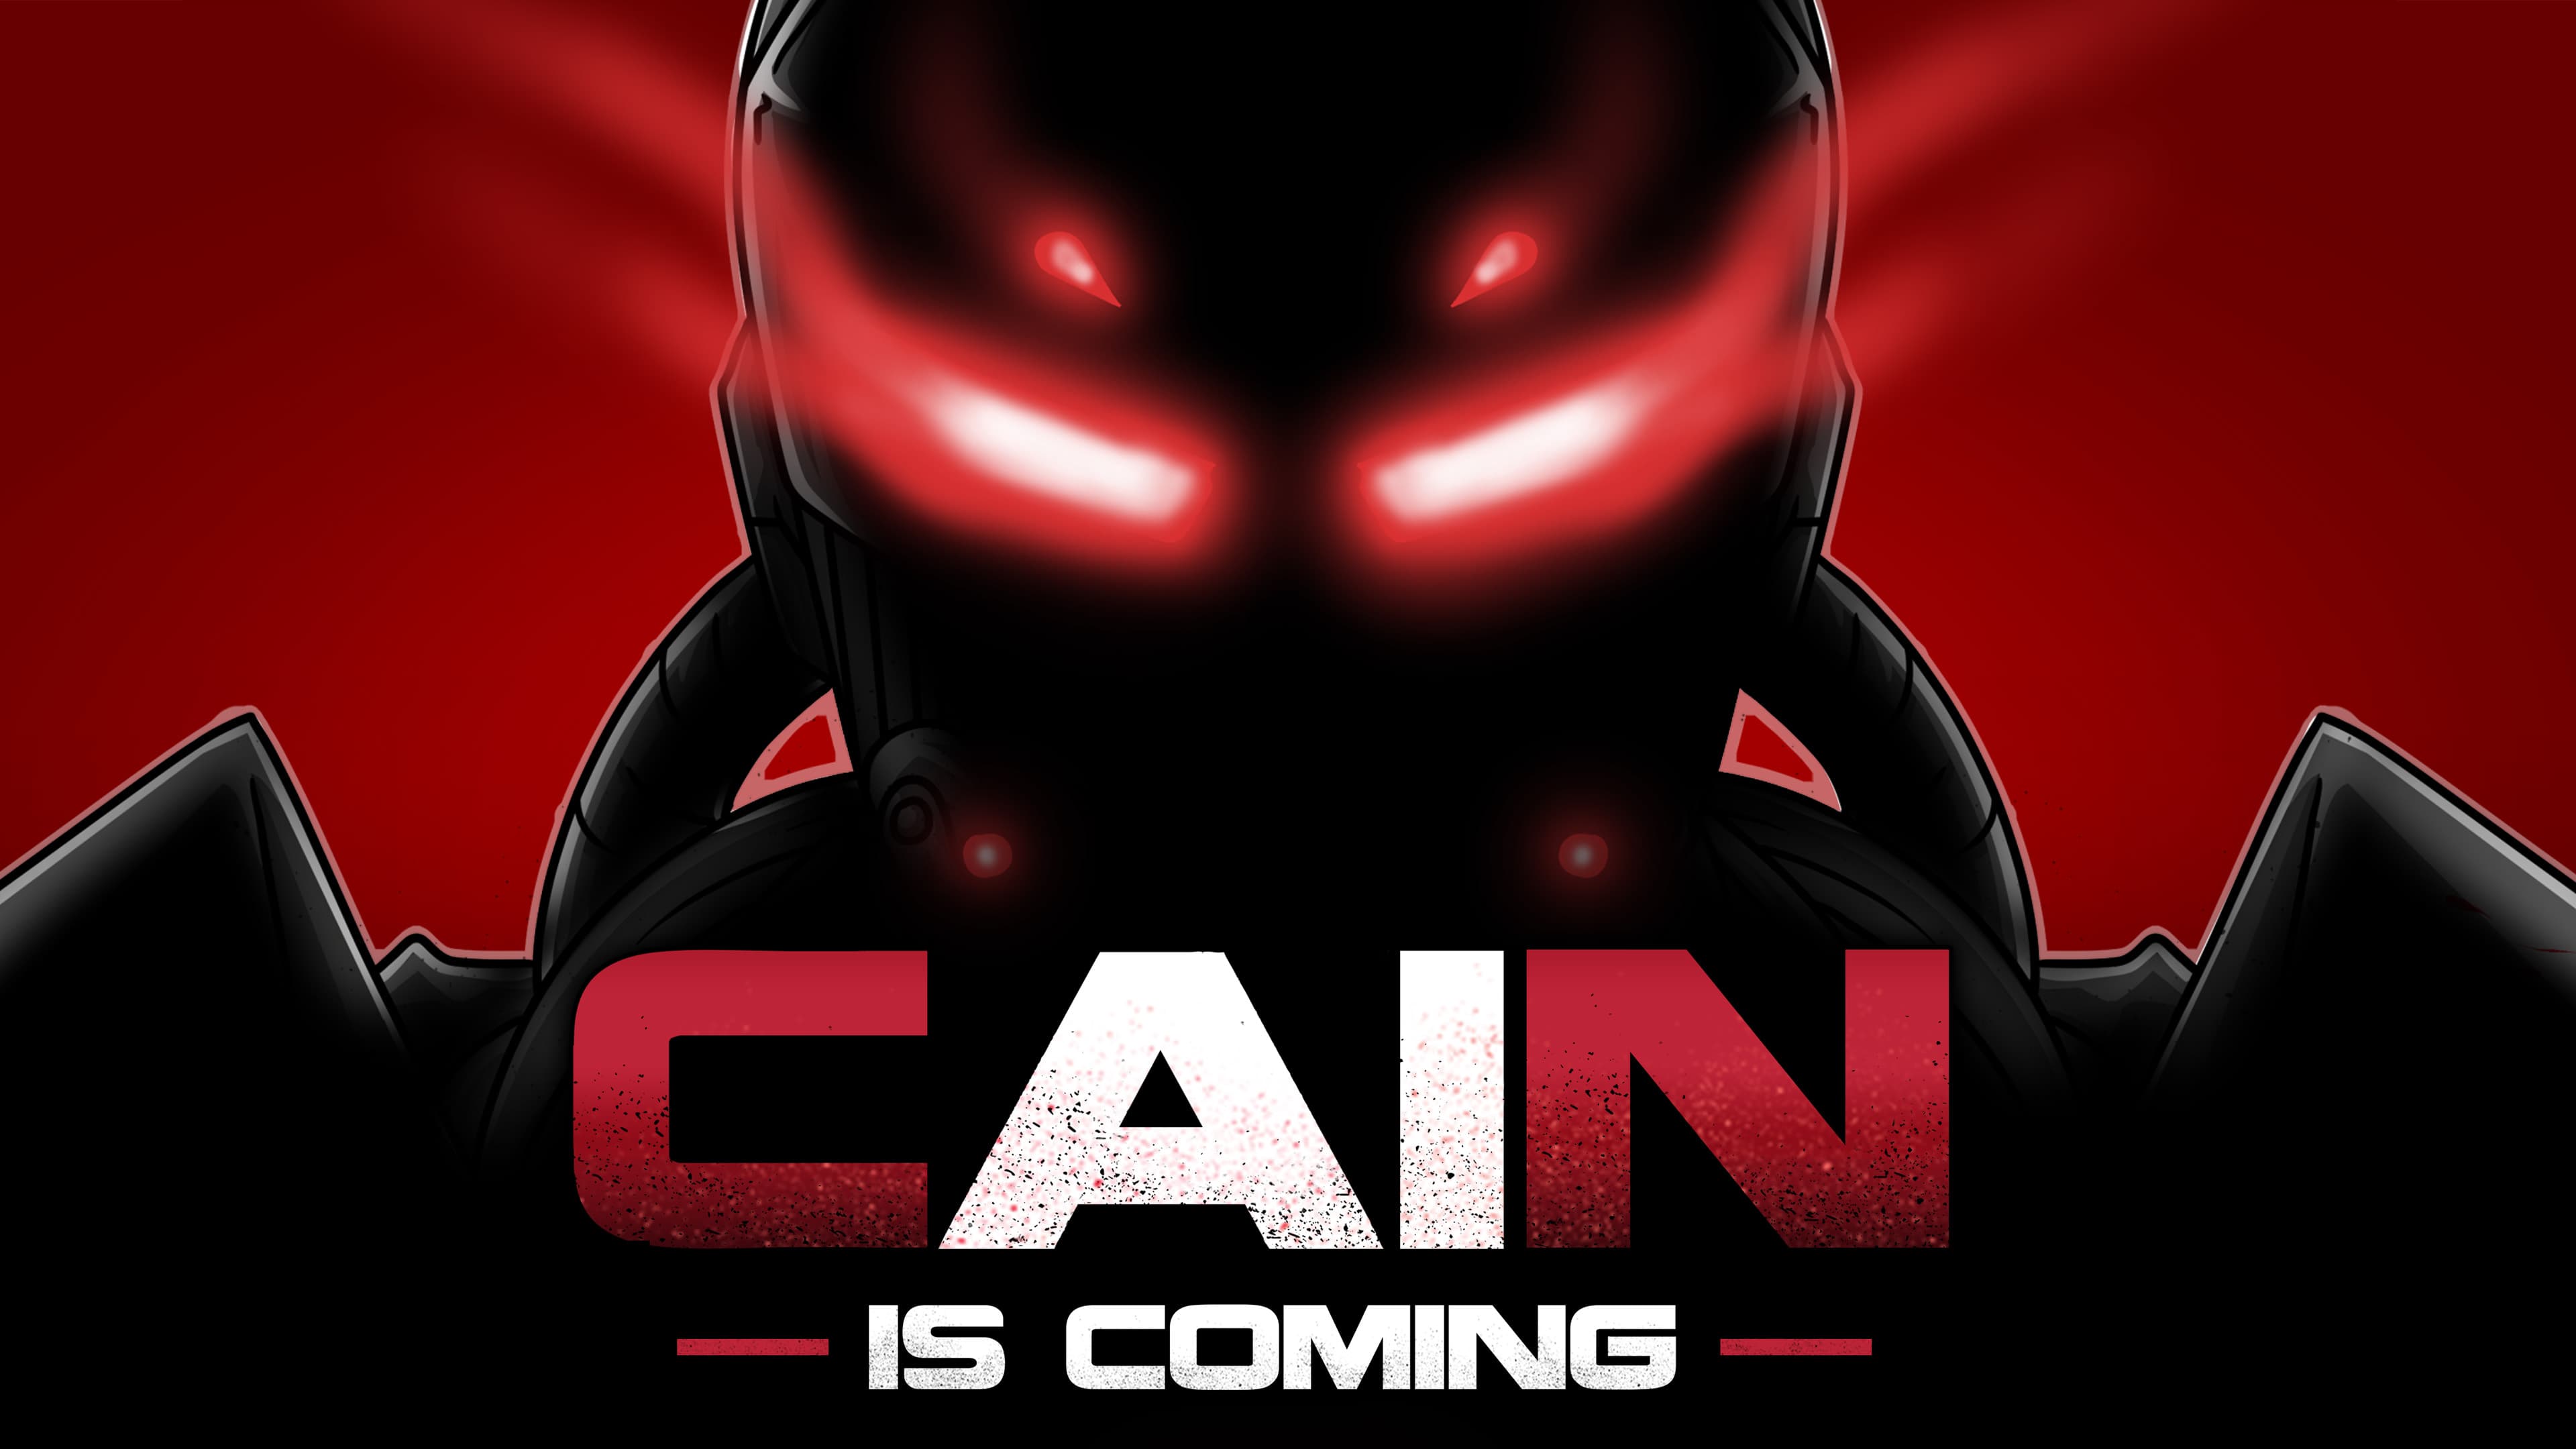 Cain is coming